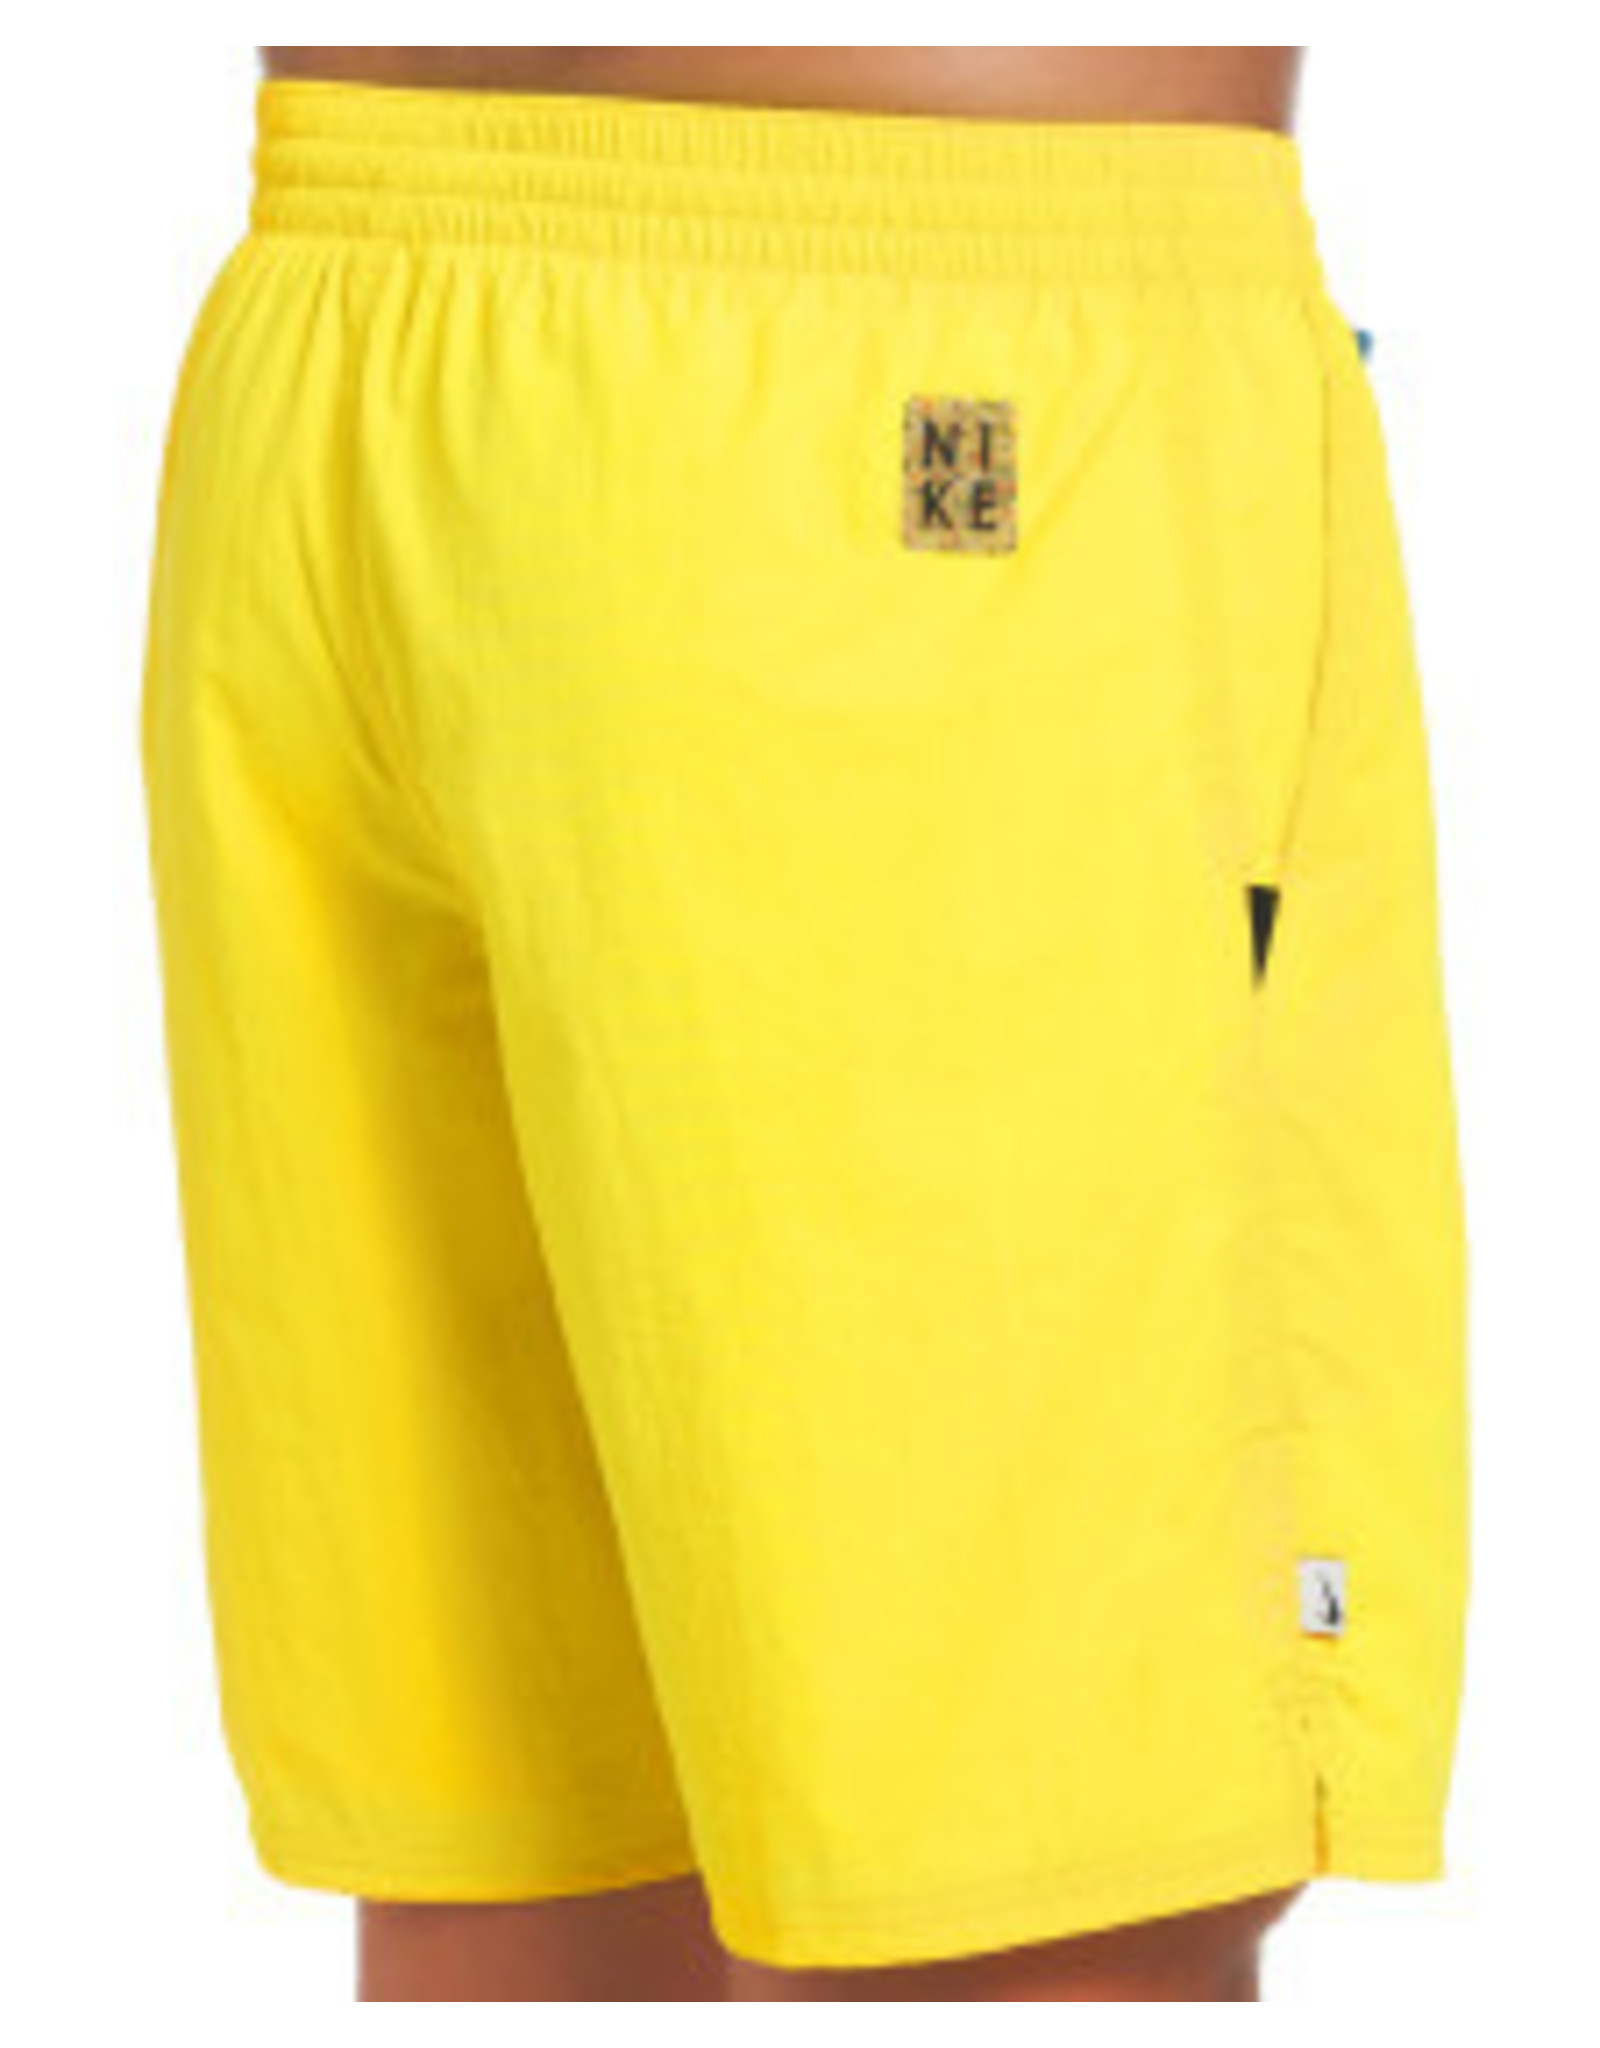 NIKE NIKE ELECTRIC SWOOSH ICON 7" VOLLEY SHORT